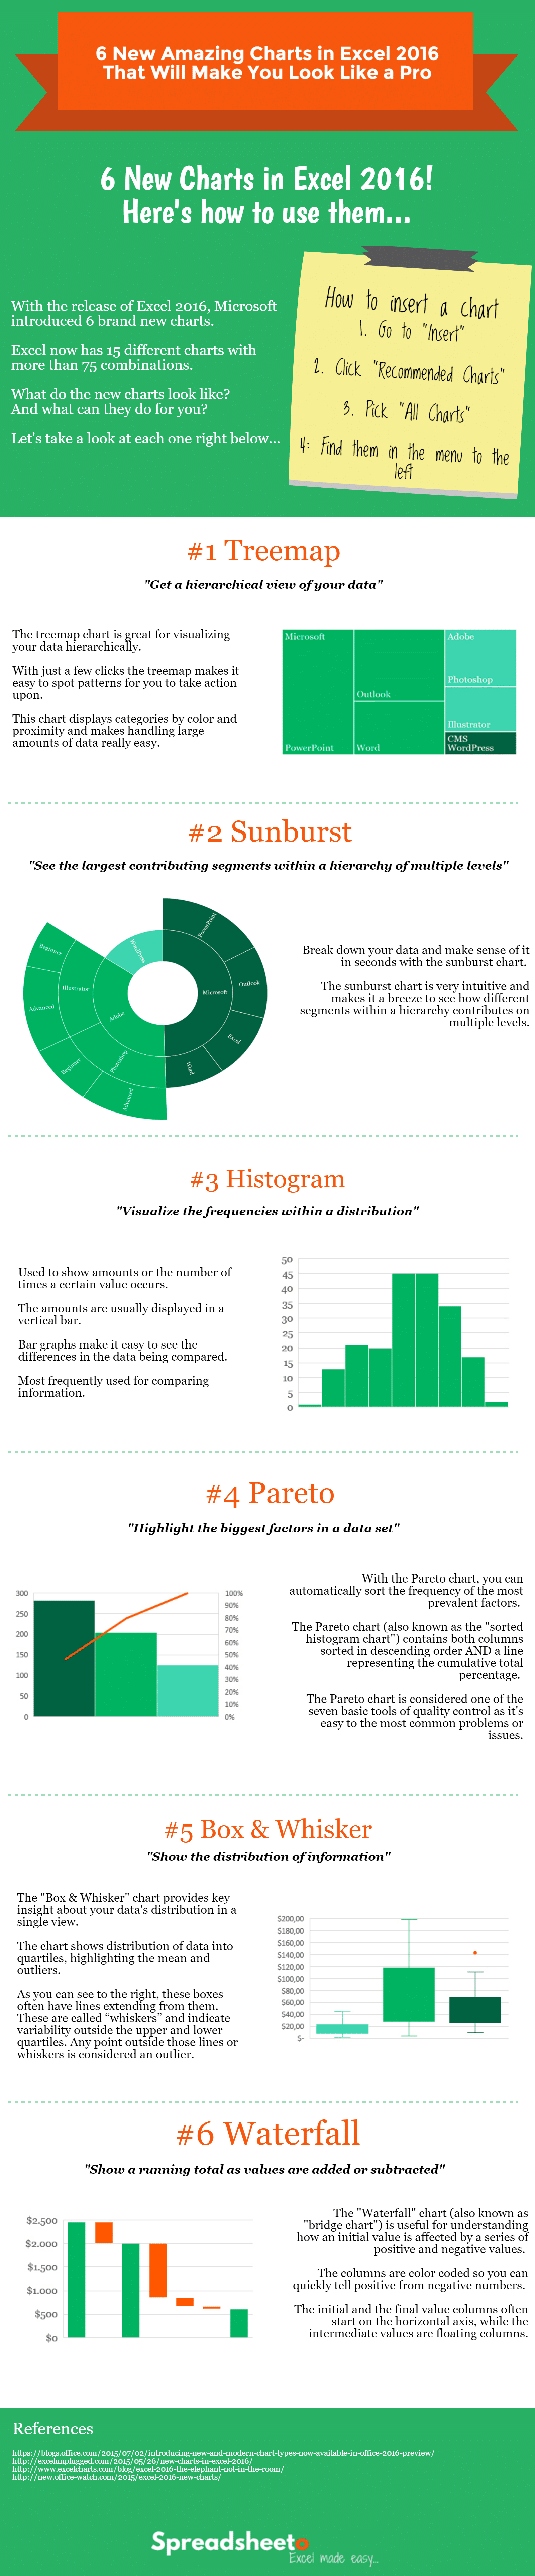 Infographic Charts In Excel